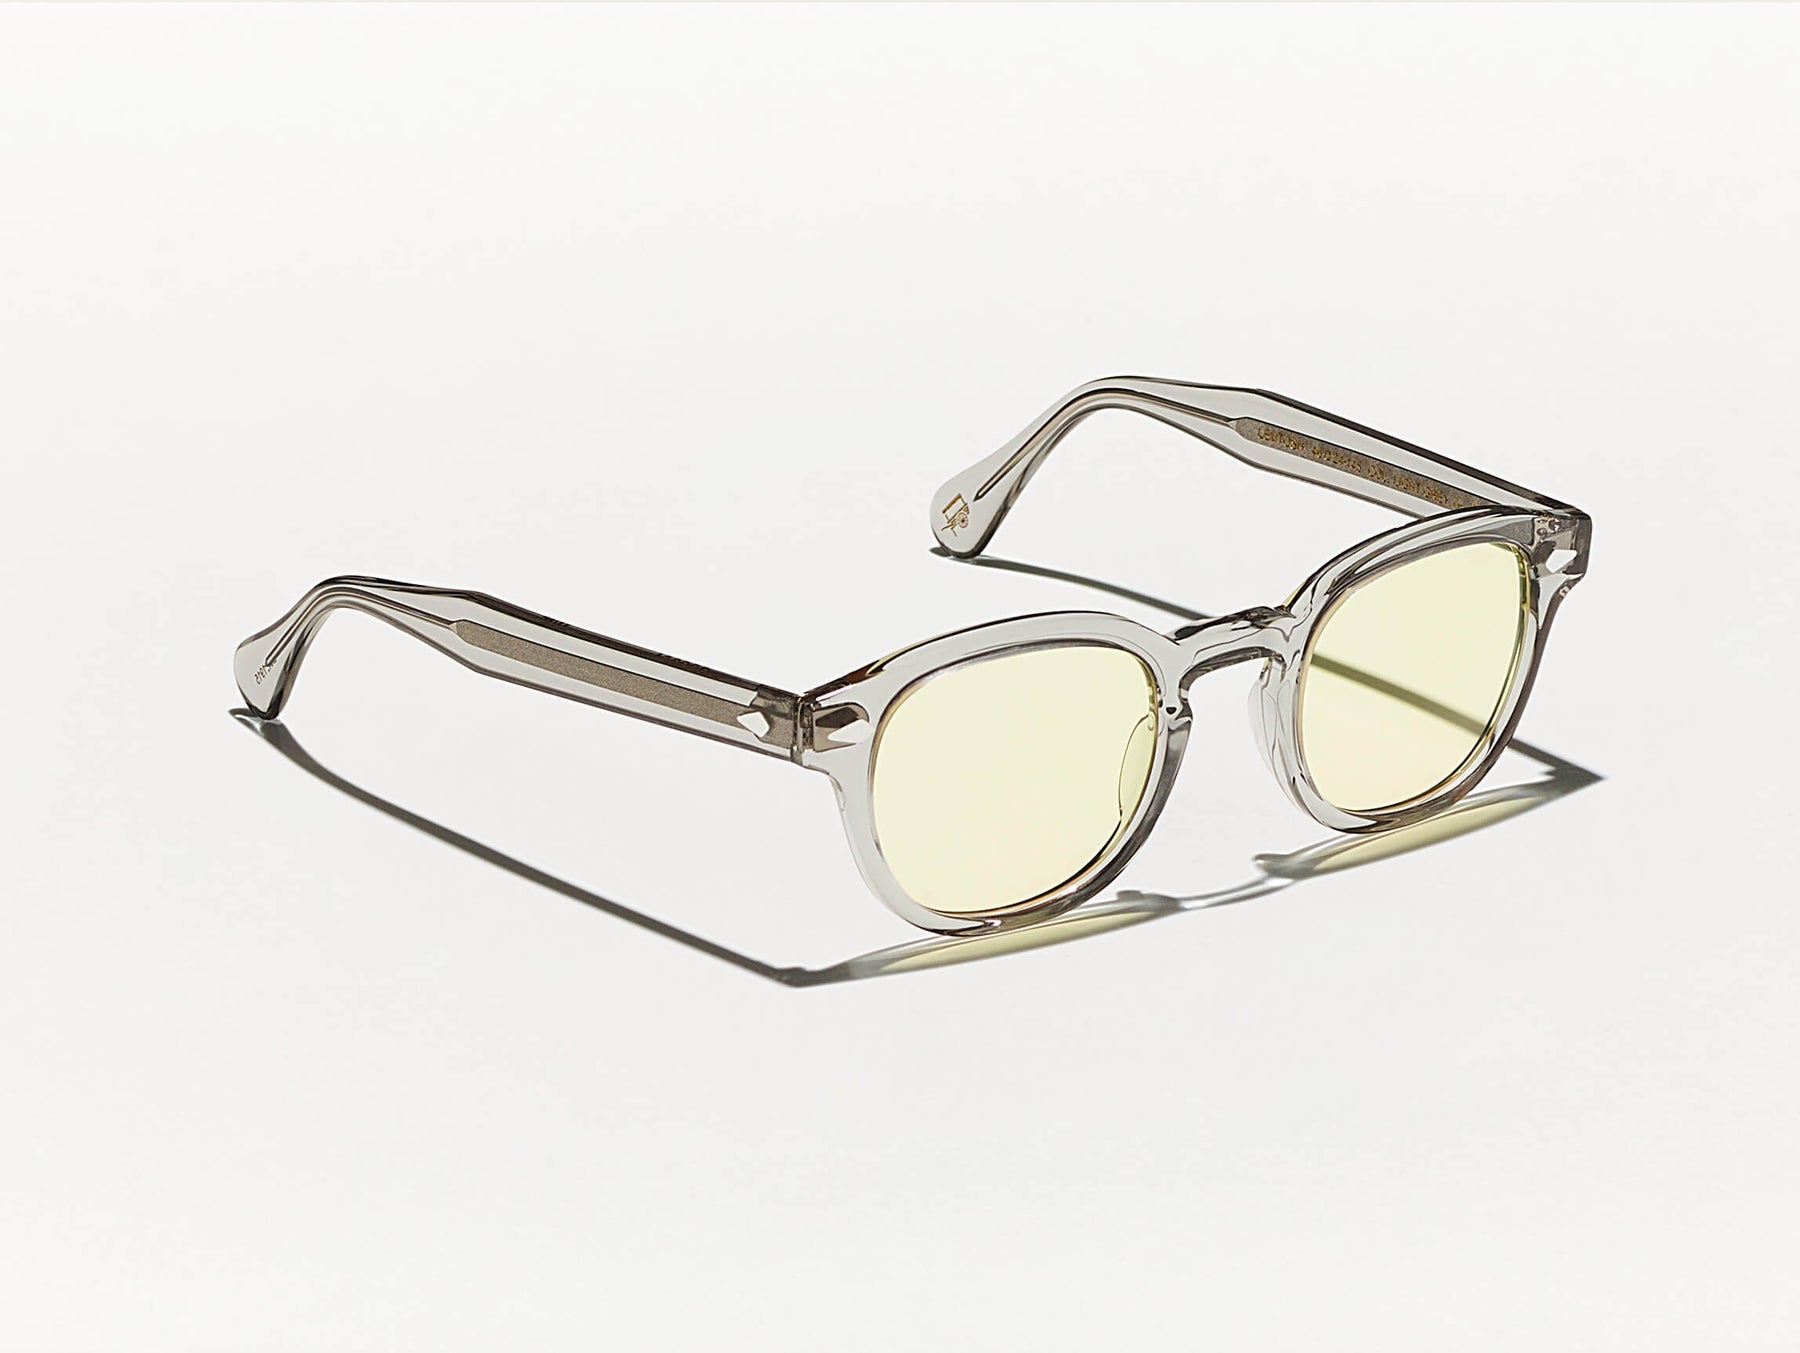 The LEMTOSH Pastel with Pastel Yellow Tinted Lenses